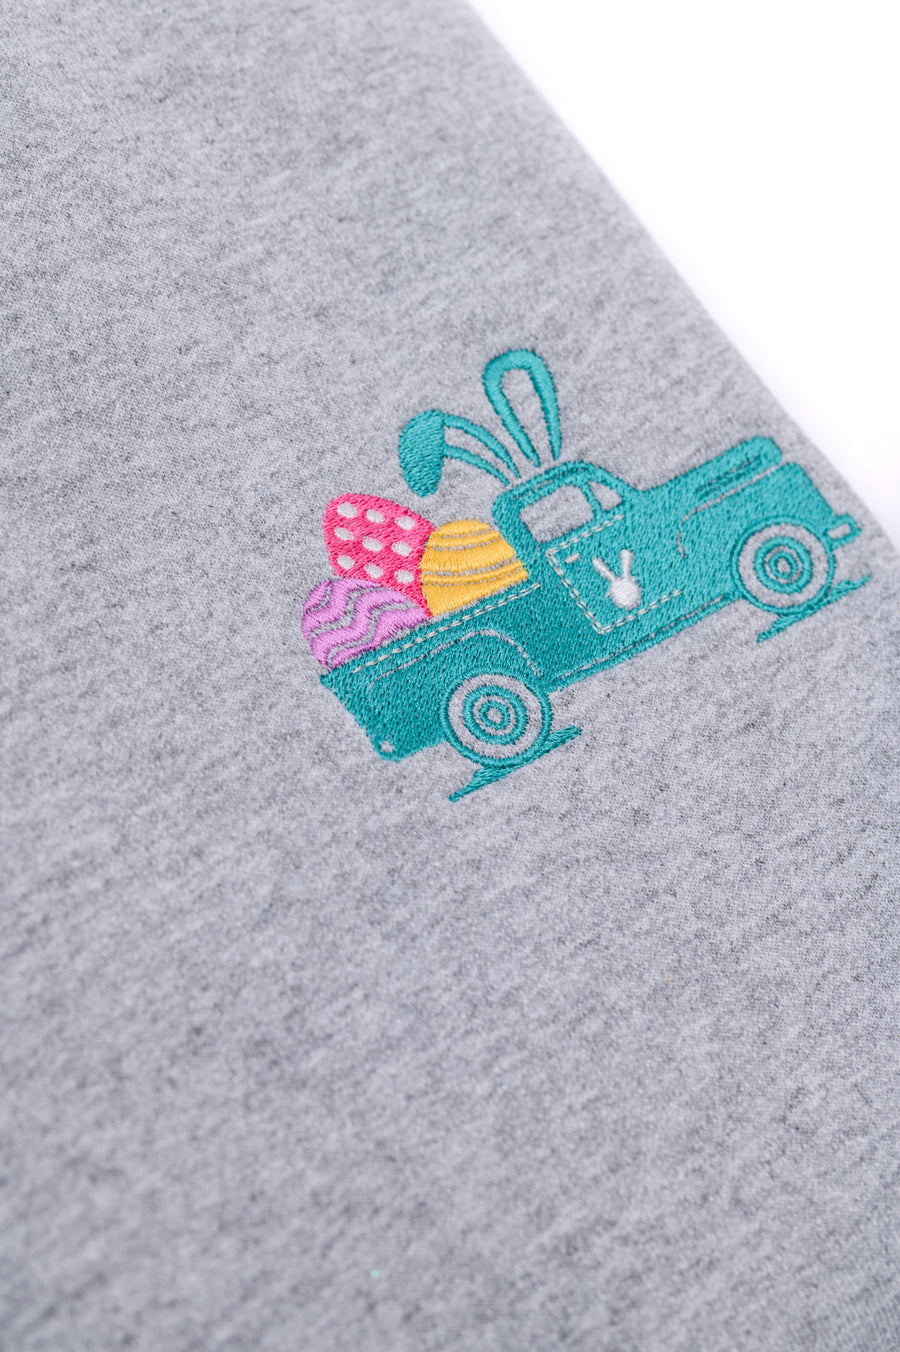 PREORDER: Embroidered Easter Truck Sweatshirt